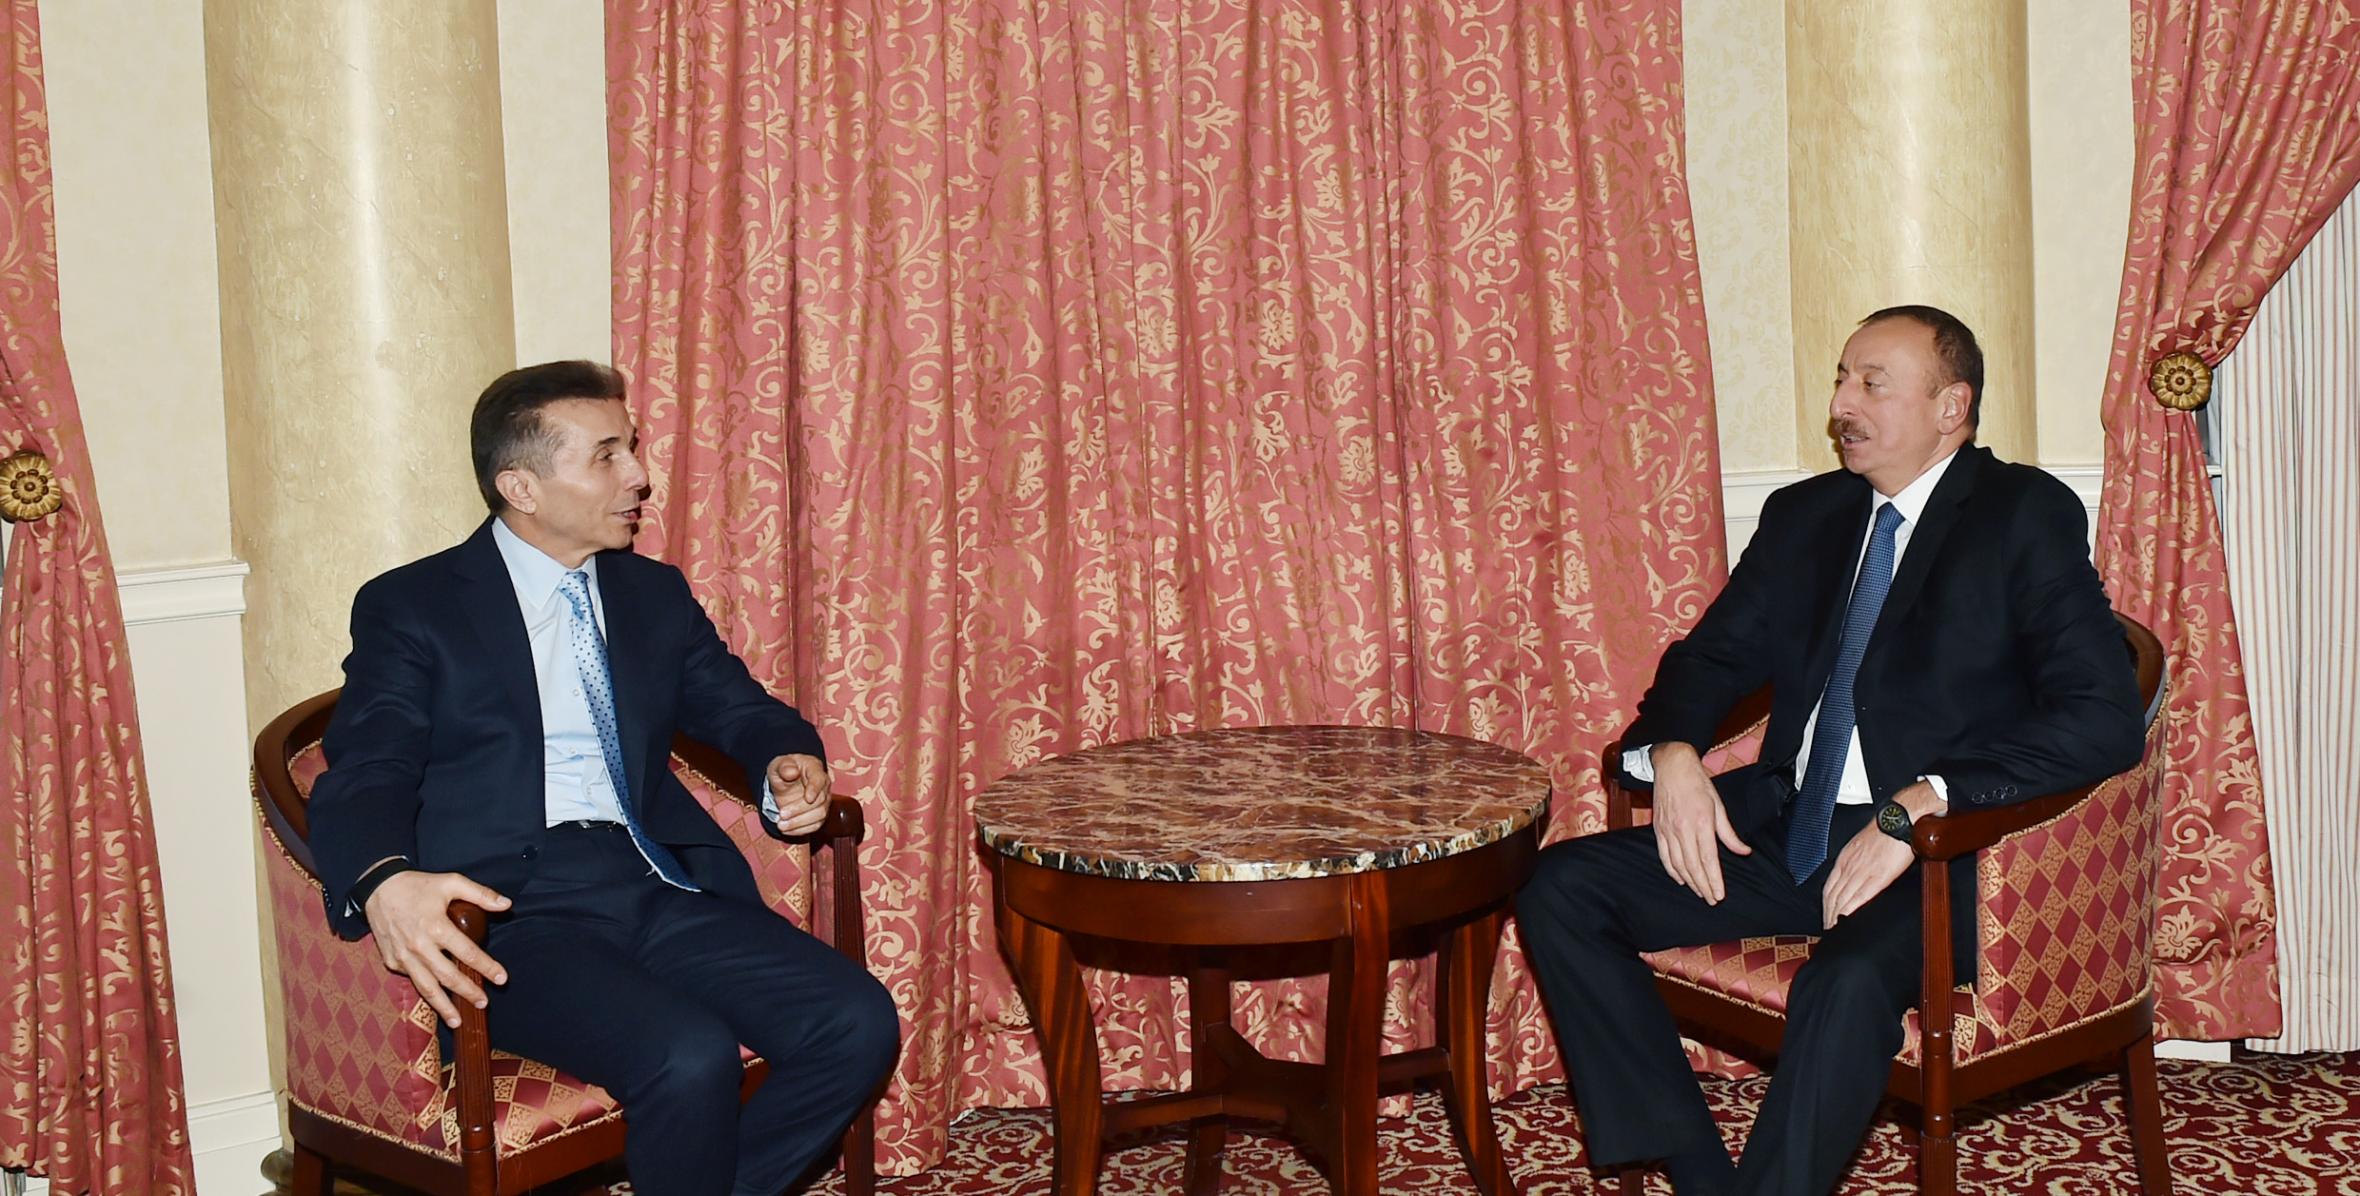 Ilham Aliyev met with the former Prime Minister of Georgia